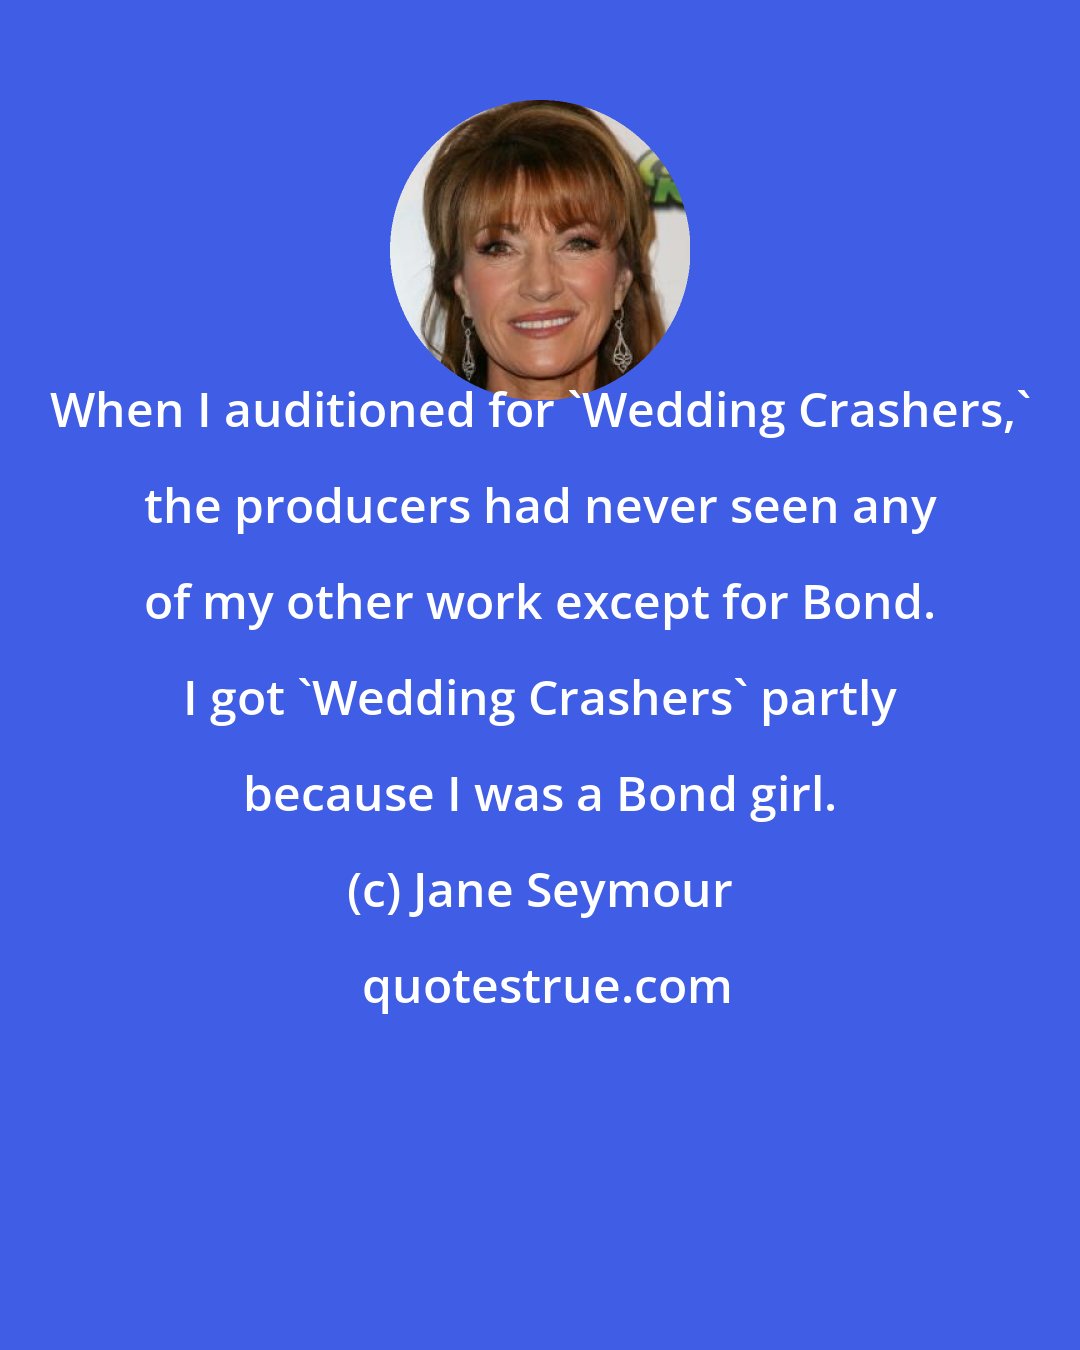 Jane Seymour: When I auditioned for 'Wedding Crashers,' the producers had never seen any of my other work except for Bond. I got 'Wedding Crashers' partly because I was a Bond girl.